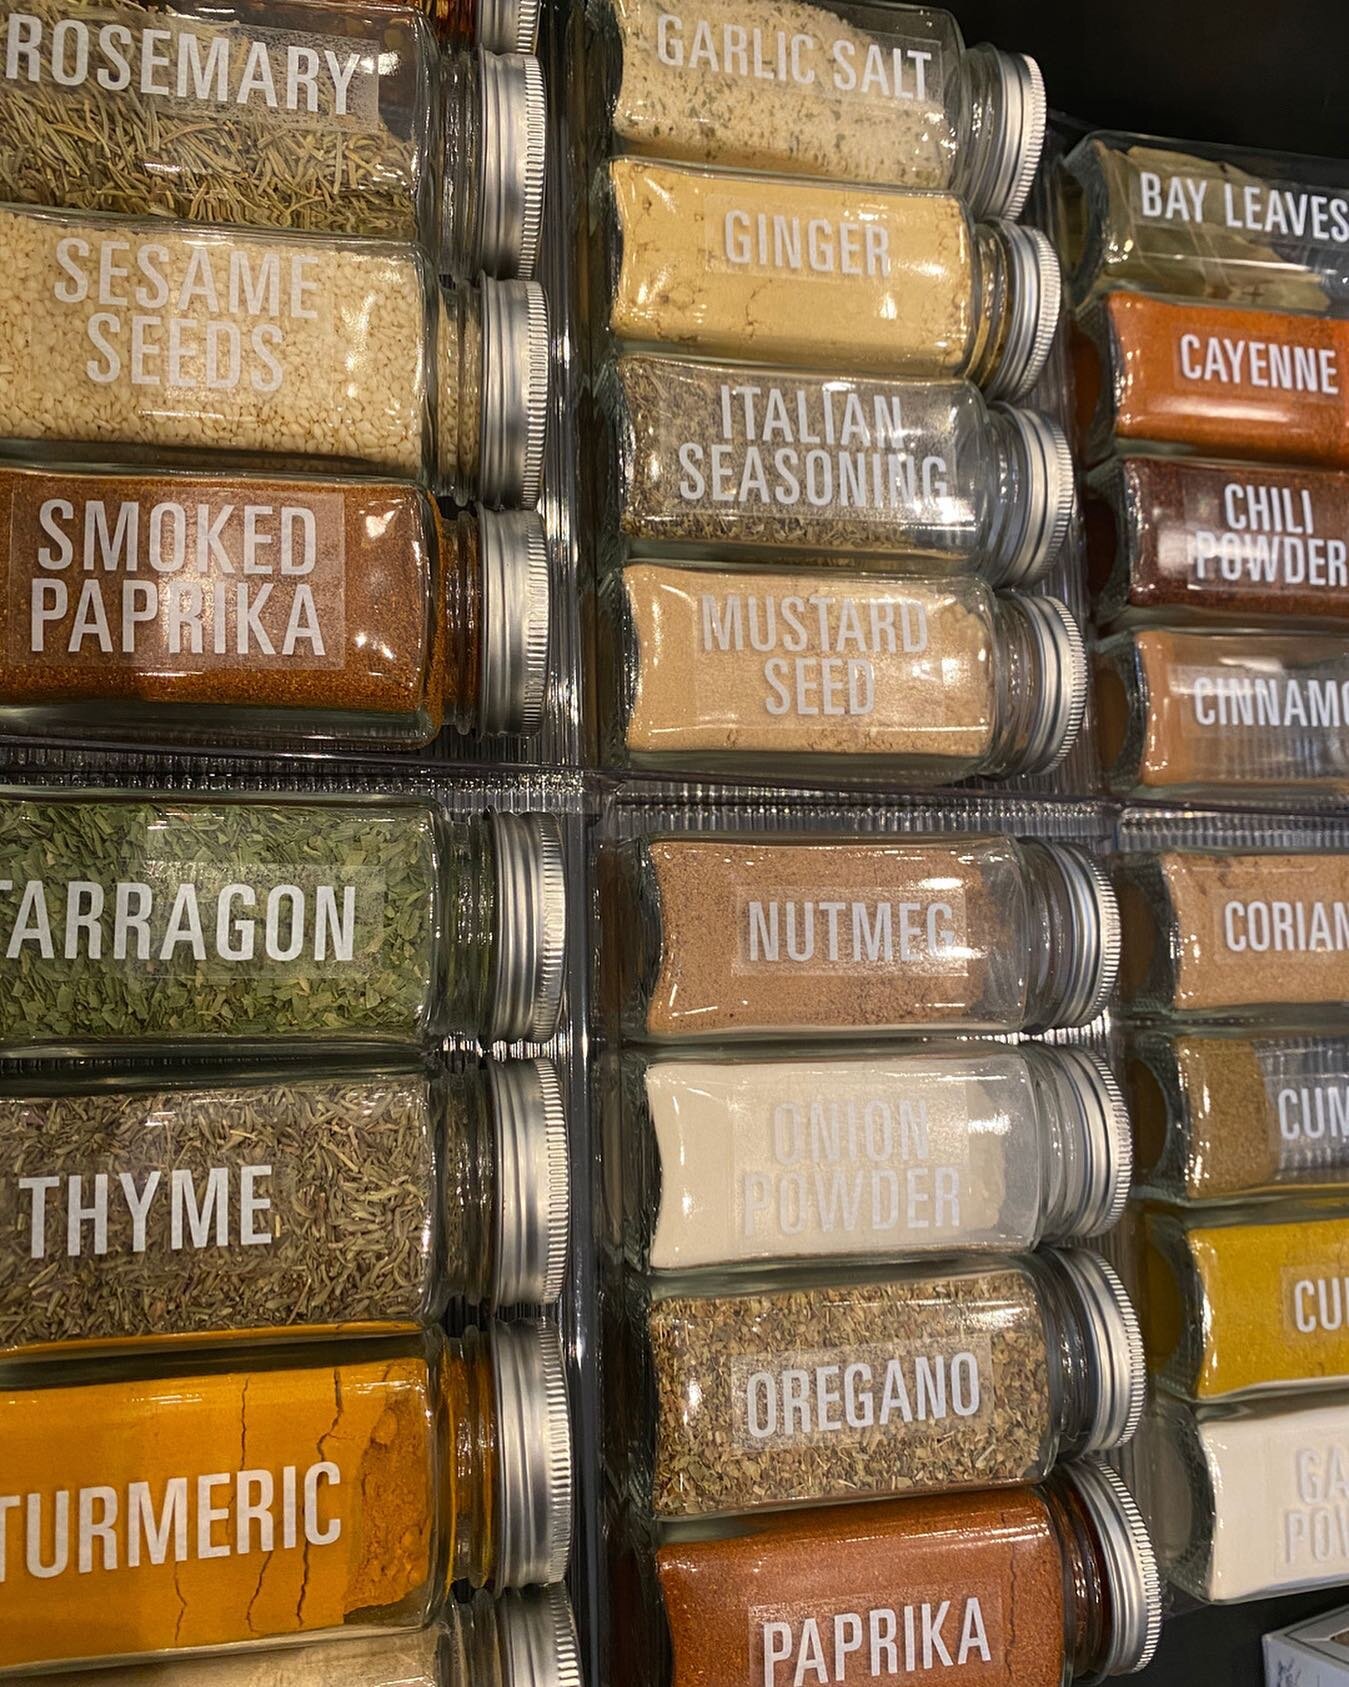 How do you organize your spices? 🌶
⠀⠀⠀⠀⠀⠀⠀⠀⠀
We like to put them all in clear glass jars and alphabetize them. This helps you quickly find what you're looking for when you are cooking. 
⠀⠀⠀⠀⠀⠀⠀⠀⠀
Call us to get your spice drawer organized! 
⠀⠀⠀⠀⠀⠀⠀⠀